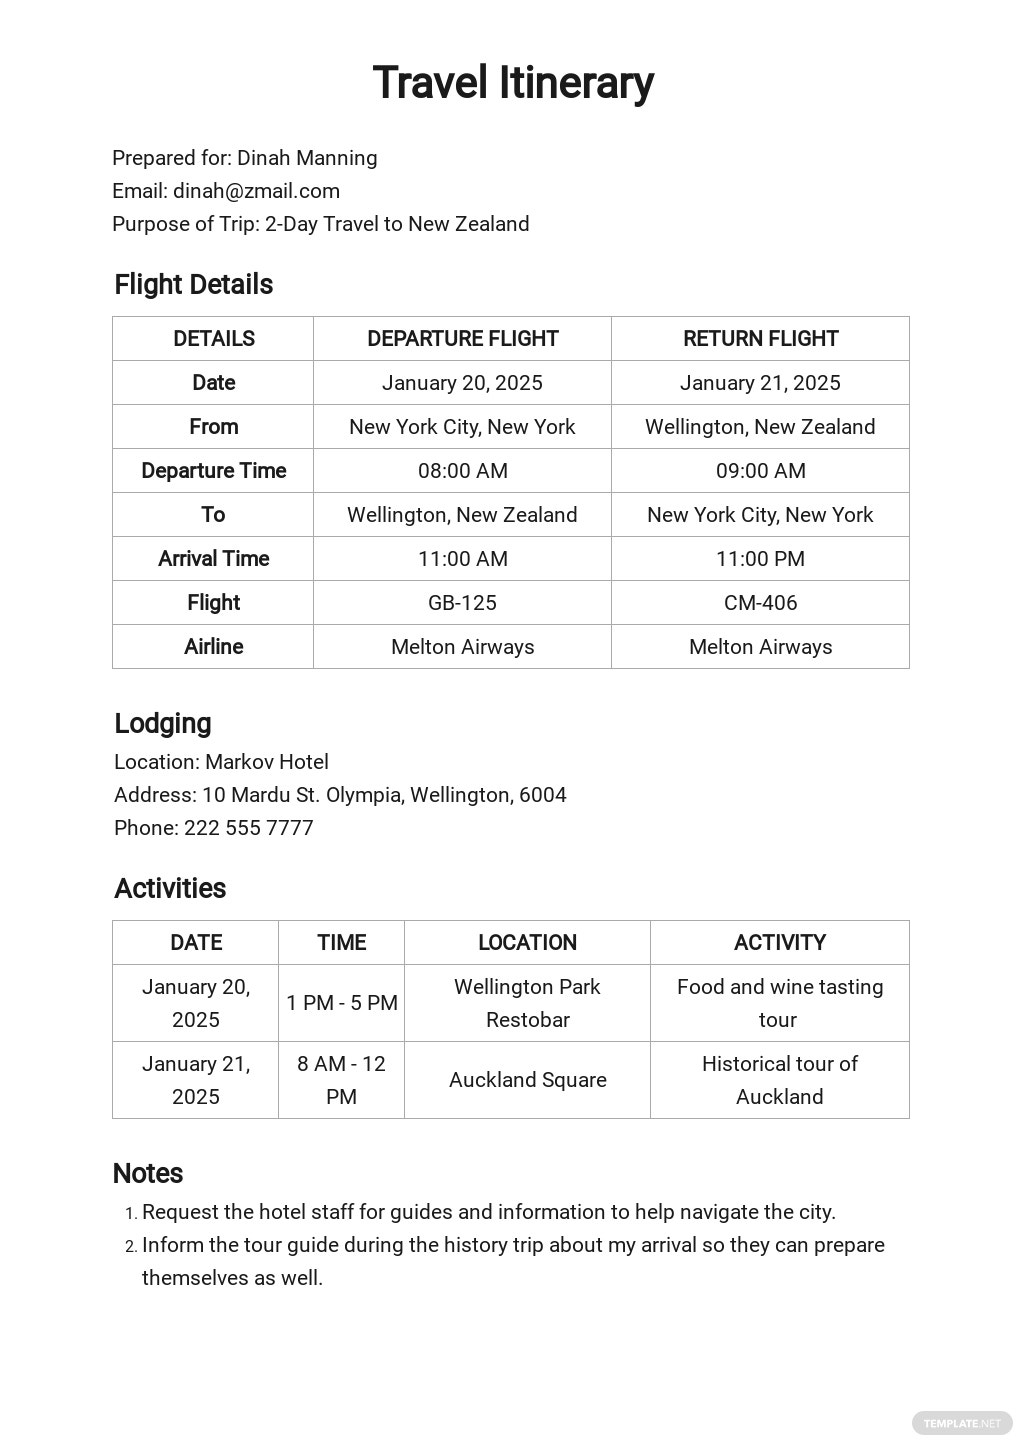 FREE Itinerary Templates in Adobe PDF  Template With International Travel Itinerary Template